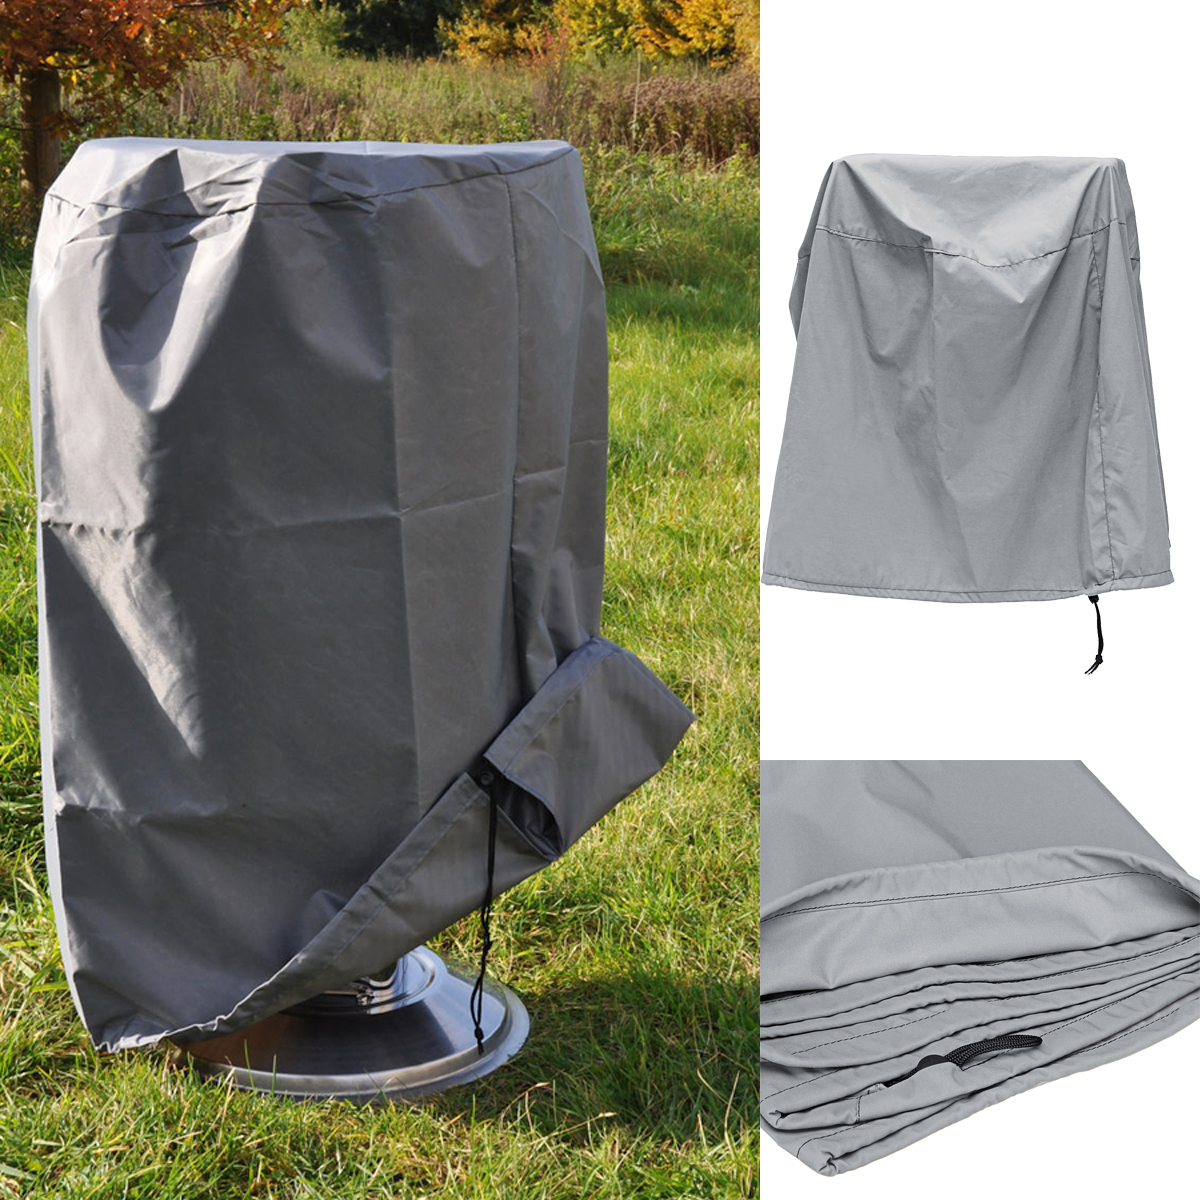 Outdoor-Grills-Cover-BBQ-Stove-Cover-Rain-UV-Proof-Canopy-Dust-Protector-For-Barbecue-Cooking-Stove-1311720-1